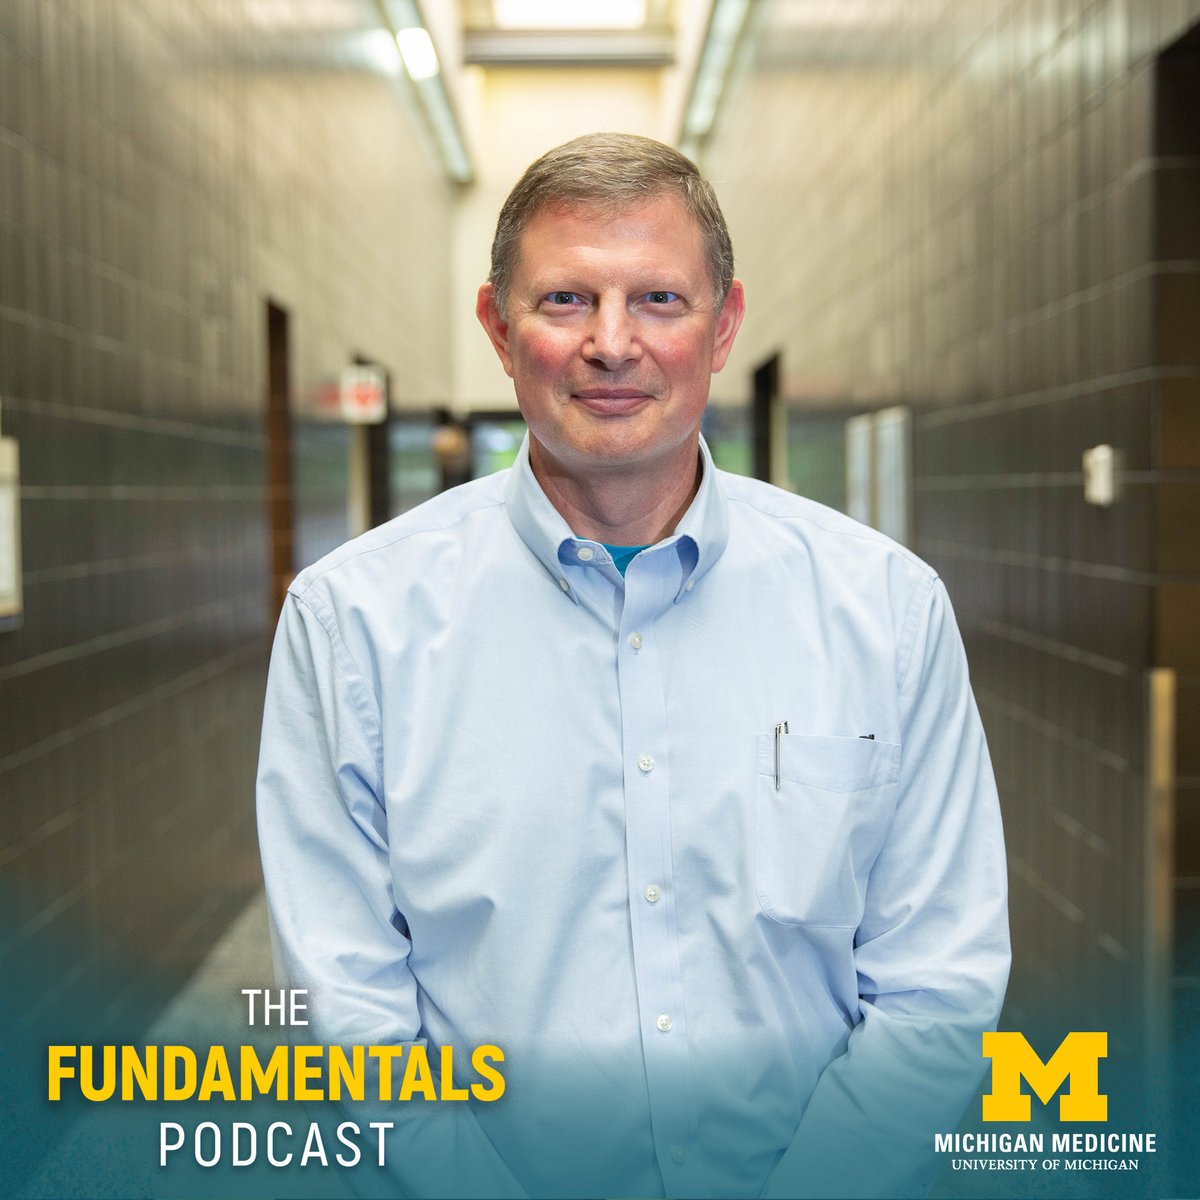 Dr. Martin Myers studies leptin’s role in brain mechanisms regulating energy and weight and is collaborating with researchers @‌UMich + @‌UCPH_Research to identify how to curb appetite without causing nausea. #DiabetesResearch Listen now: michmed.org/z4xbg #TheFundamentals